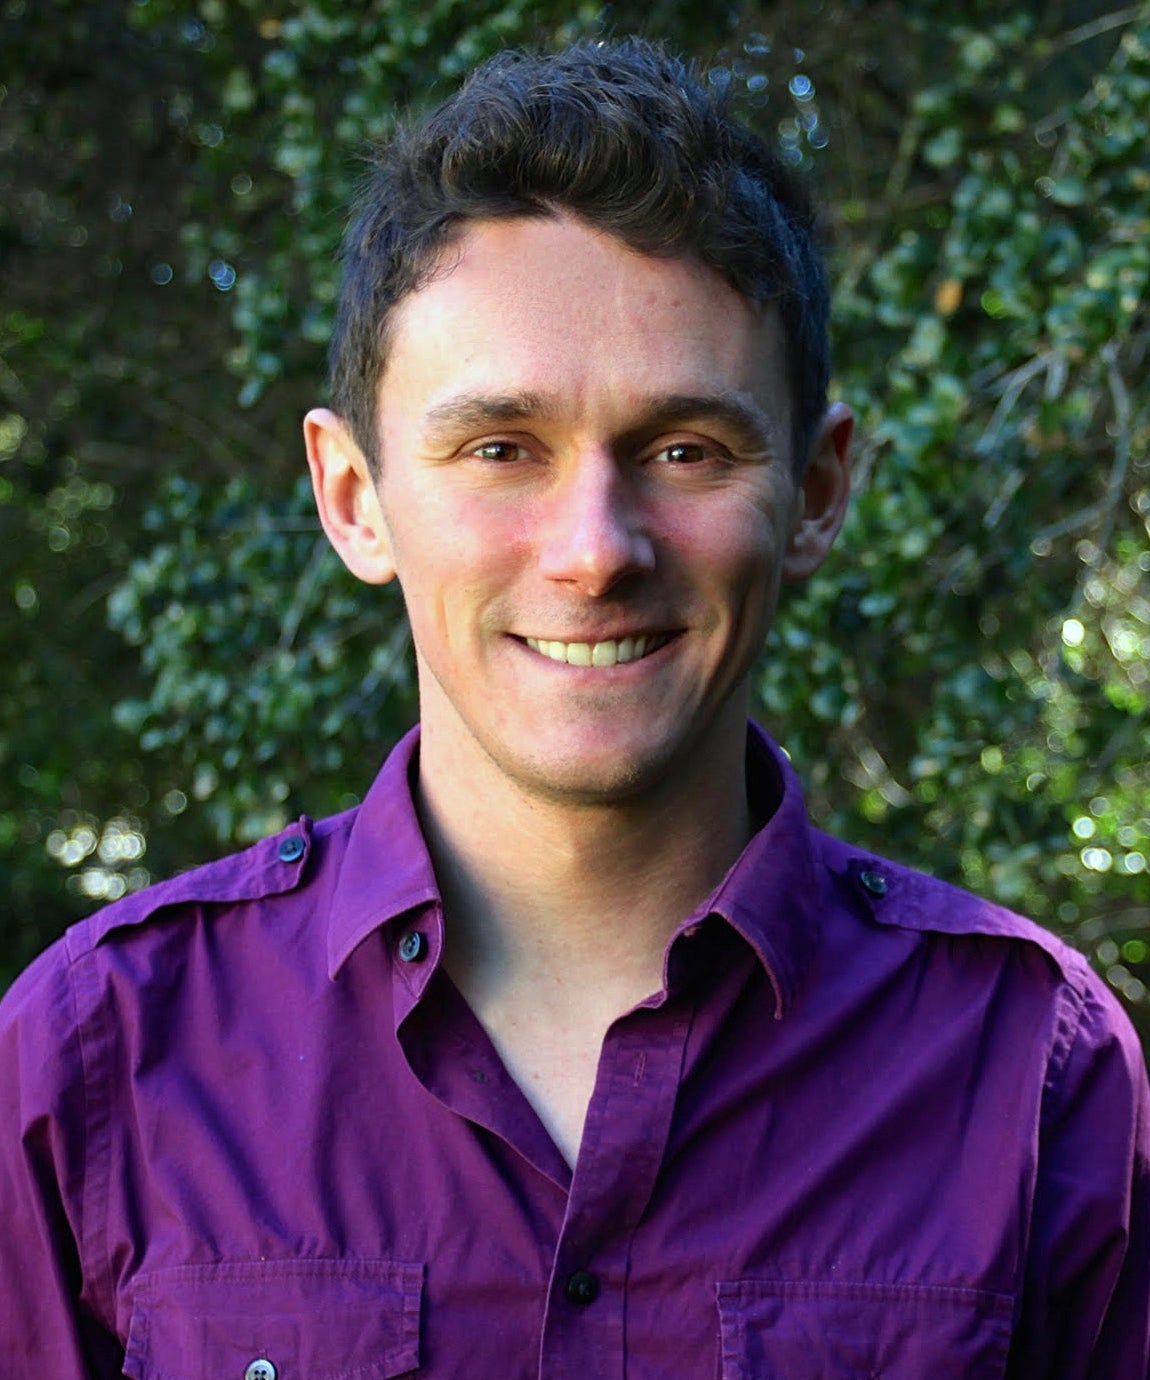 Scot Miller, wearing purple, smiling, standing in front of greenery.